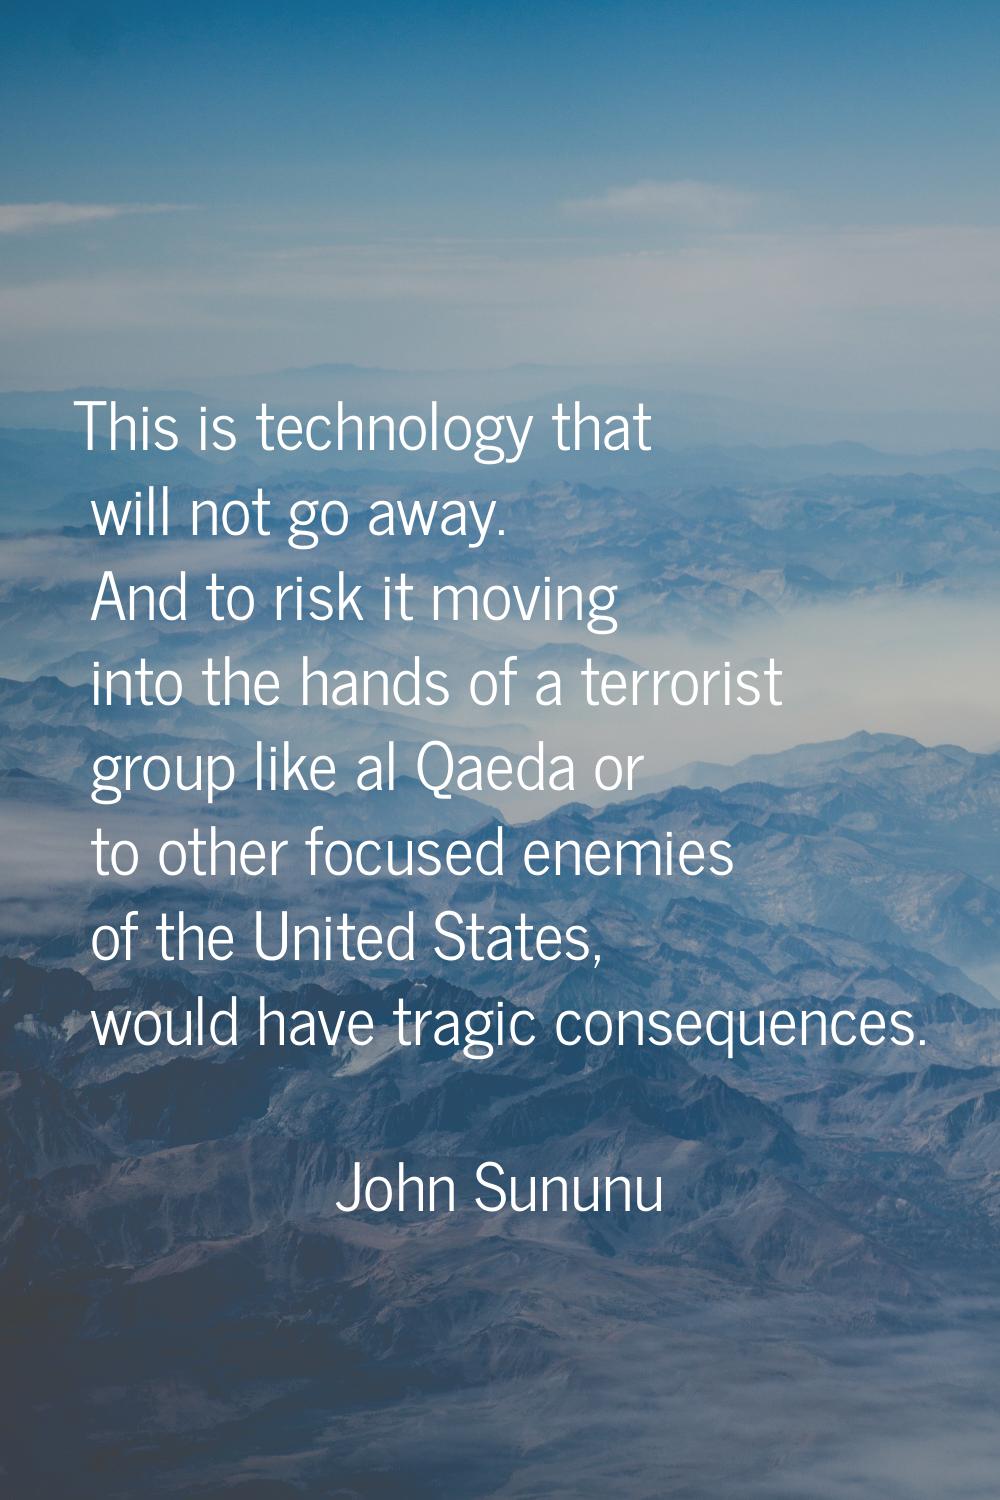 This is technology that will not go away. And to risk it moving into the hands of a terrorist group